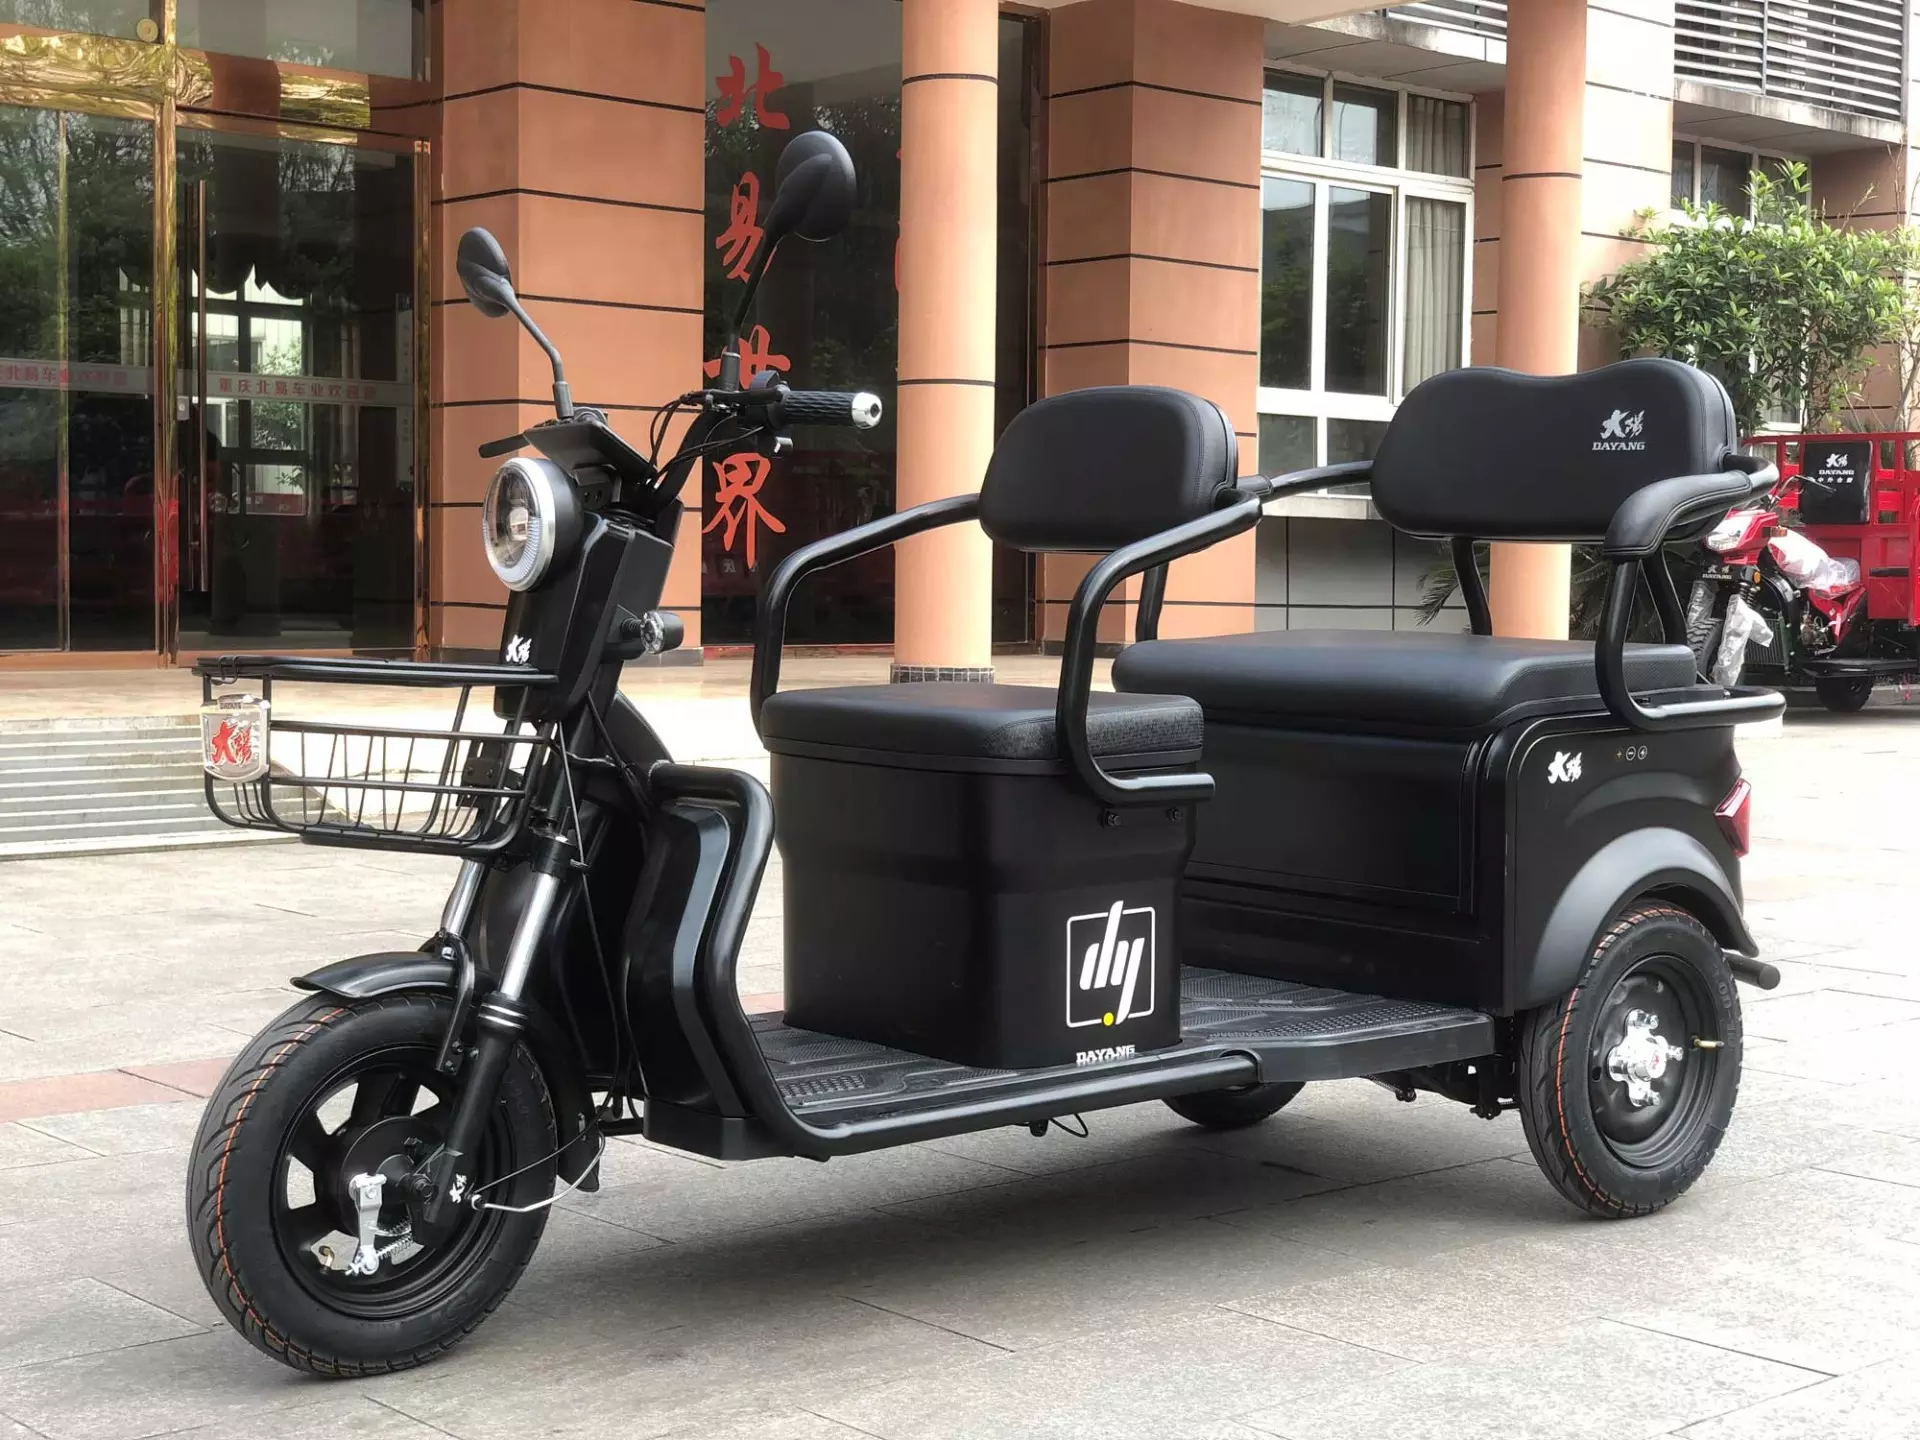 Cheap Adults 3 Wheel Electric Tricycle Price Doorstep Shipping China Max Body Customized Motor Power Battery Color Brake Origin